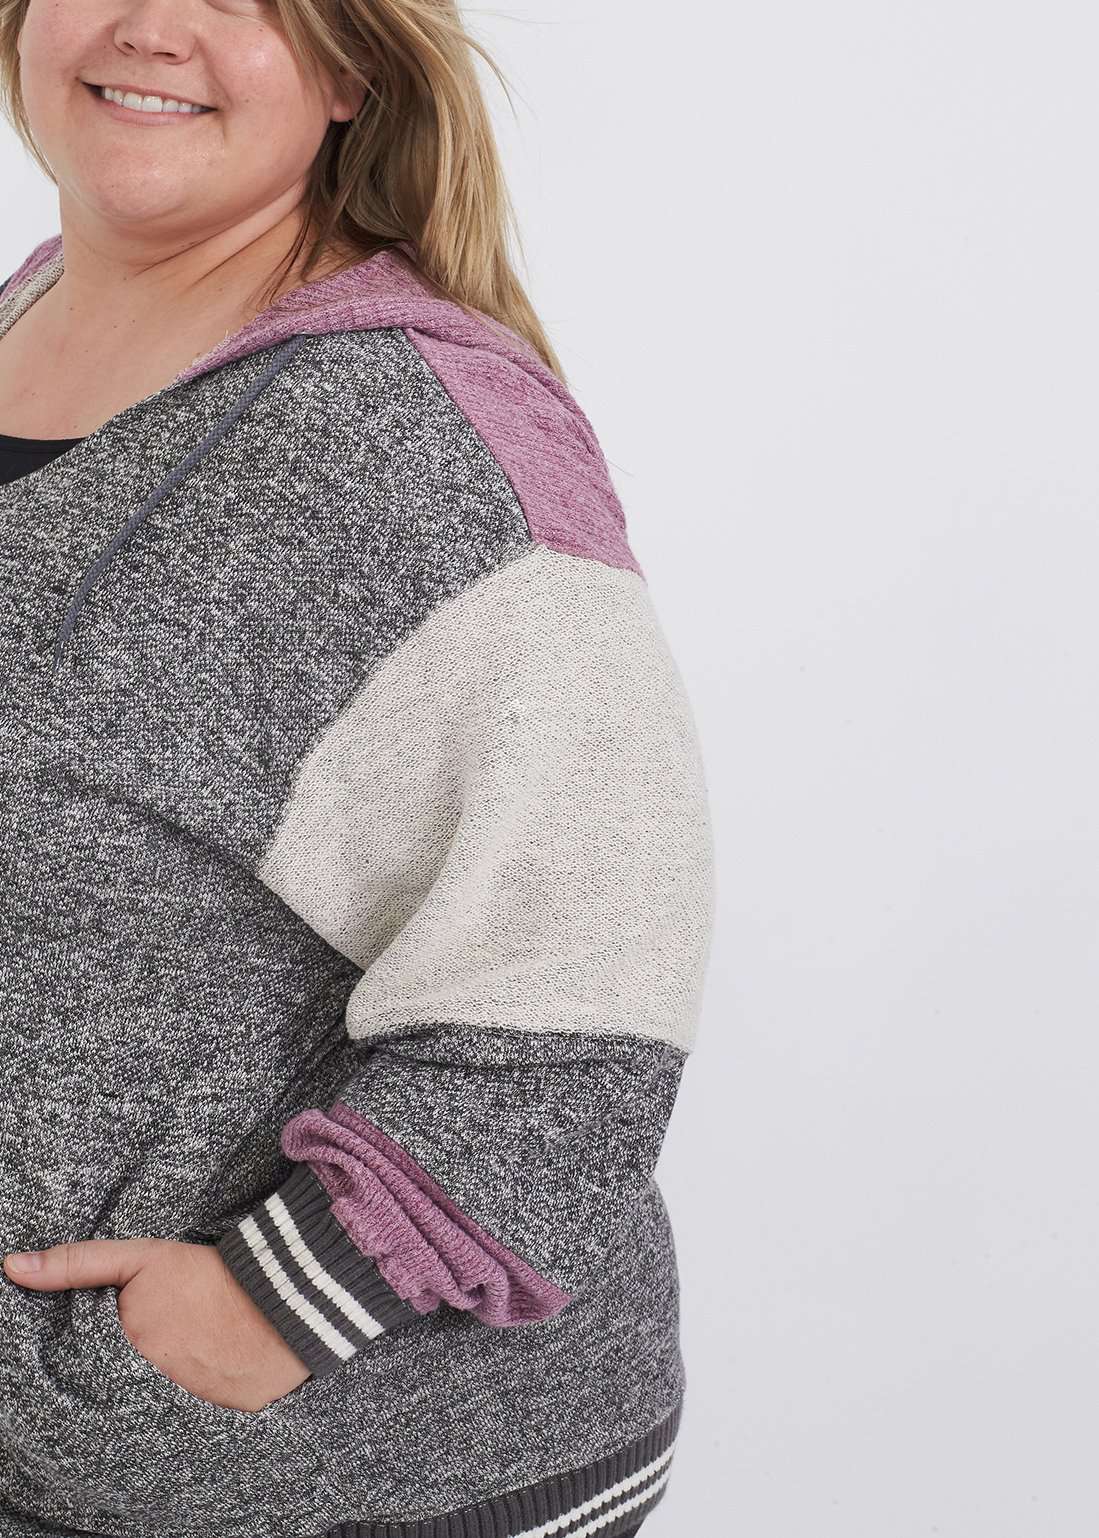 Plus size woman wearing a gray and purple hooded color block sweatshirt. It also has front pockets and banded wrist and waist.